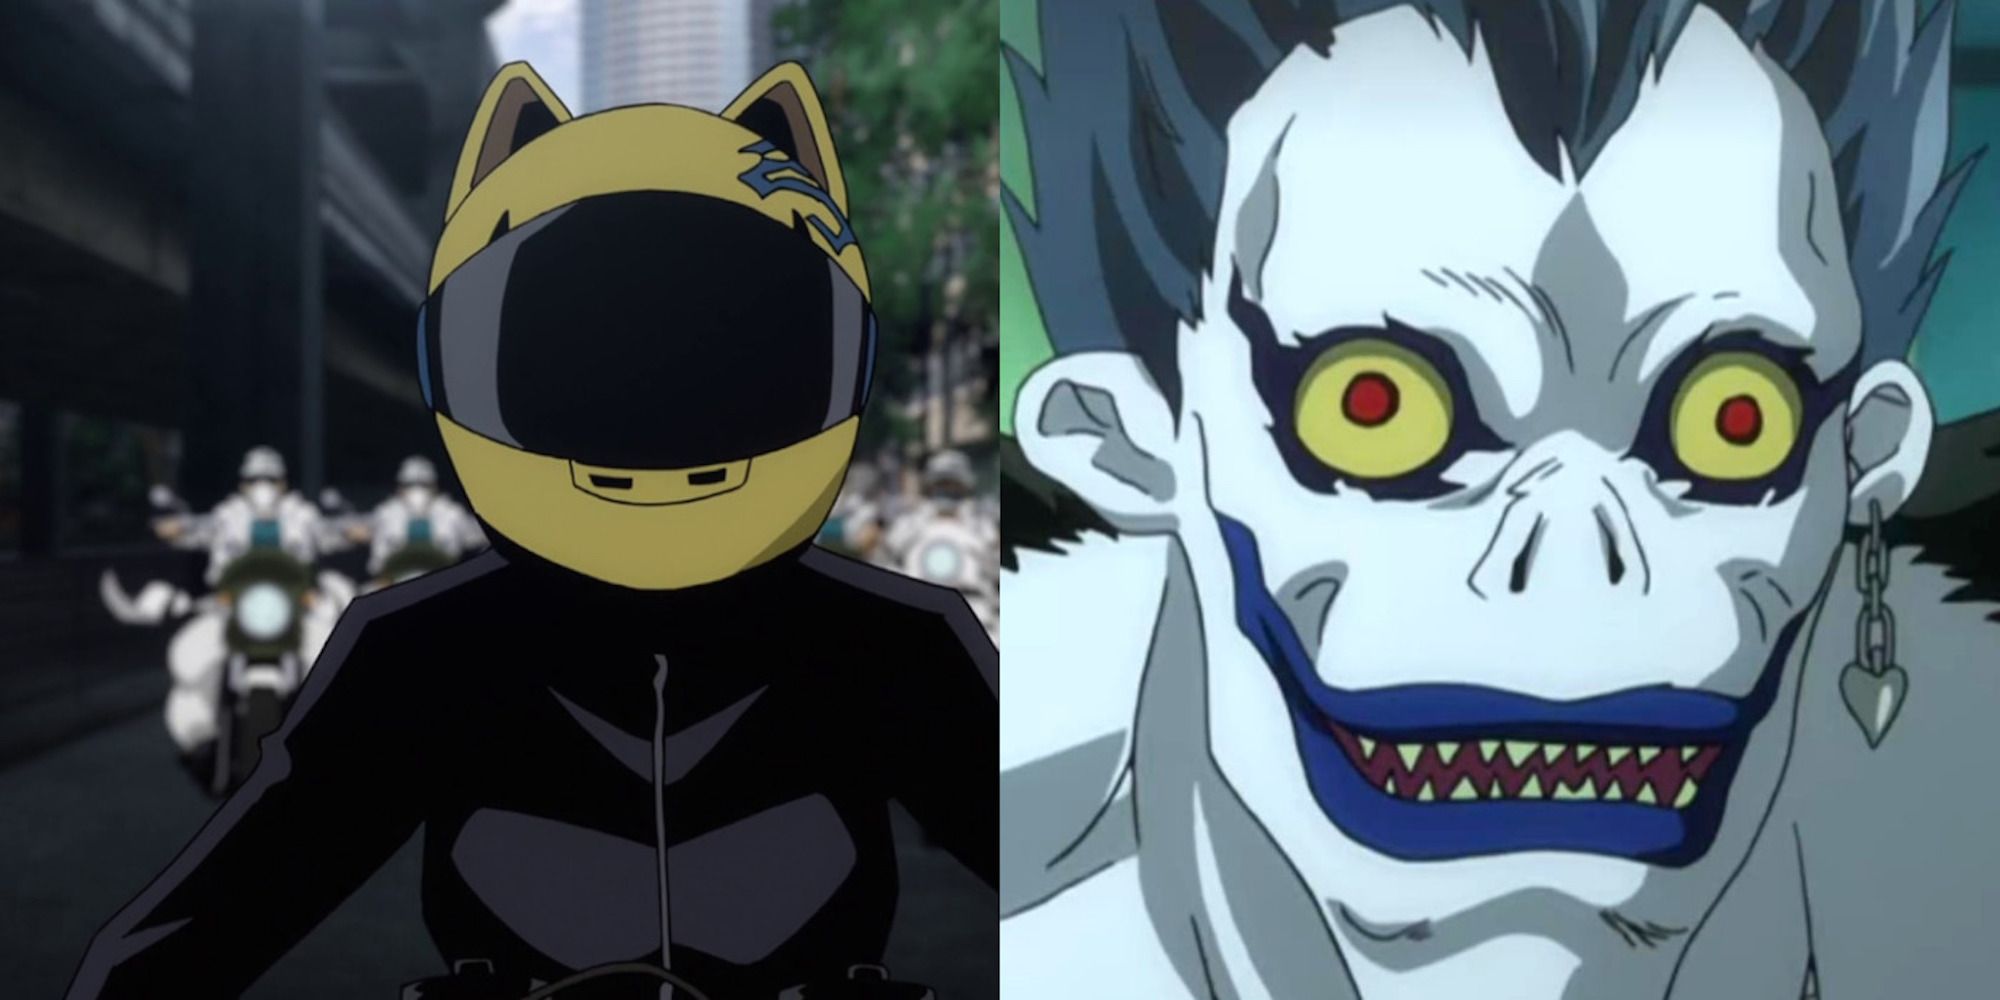 Celty from Durarara and Ryuk from Death Note